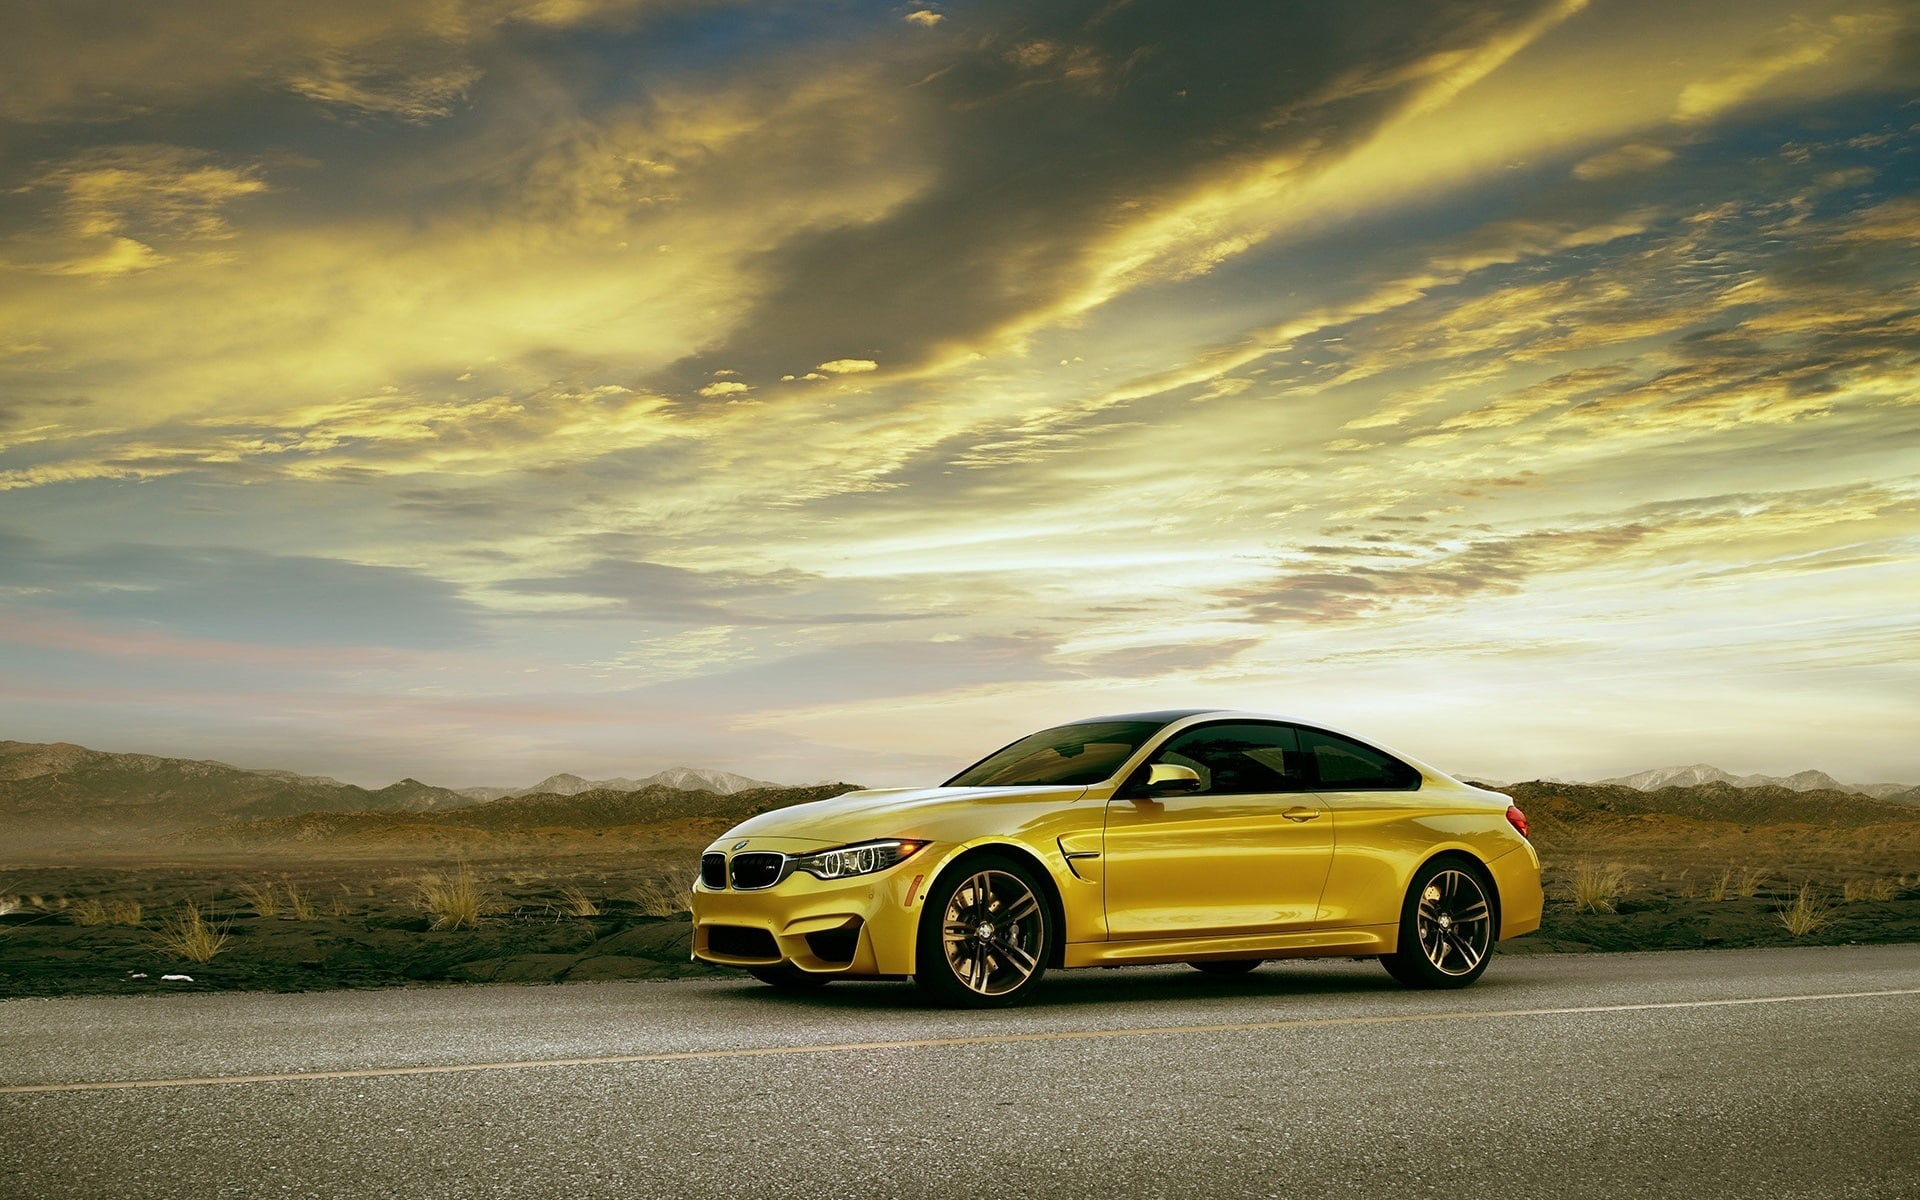 BMW M4 Coupe F82 yellow car side view